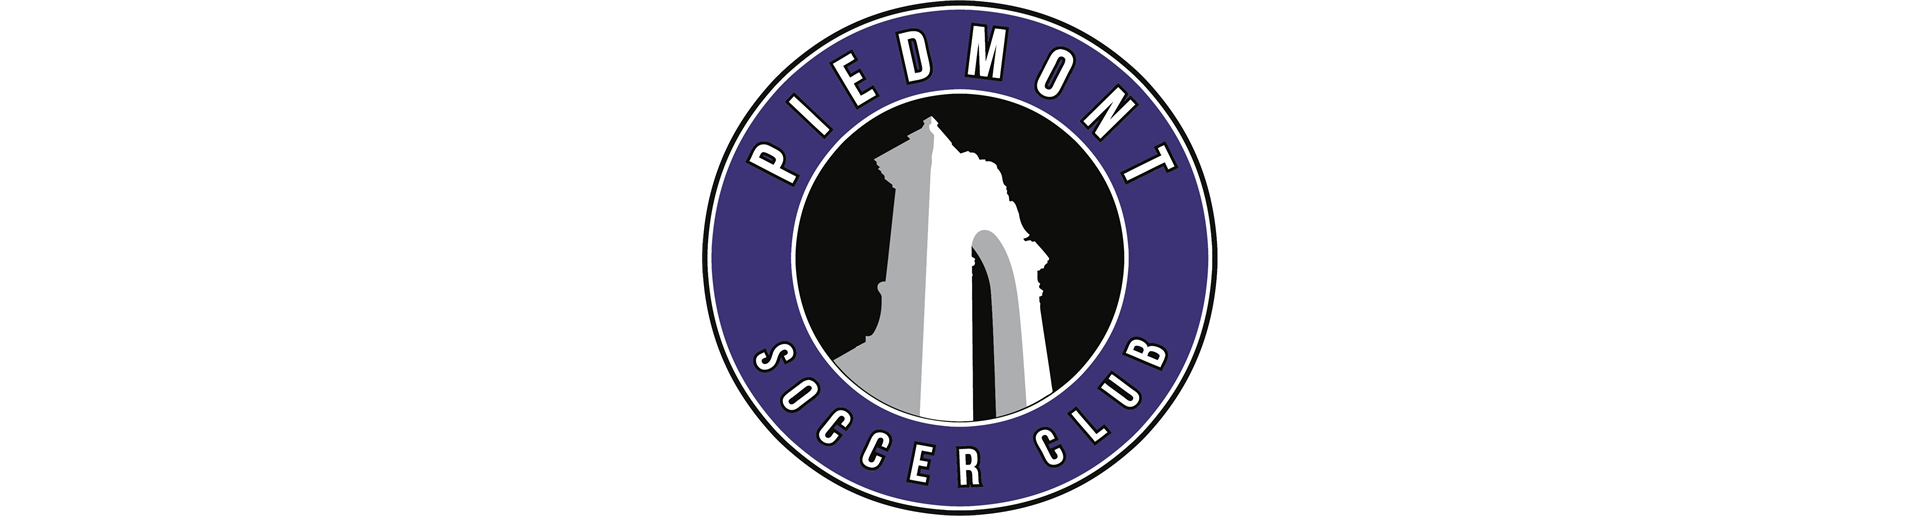 Piedmont Soccer Club-click for our Home site